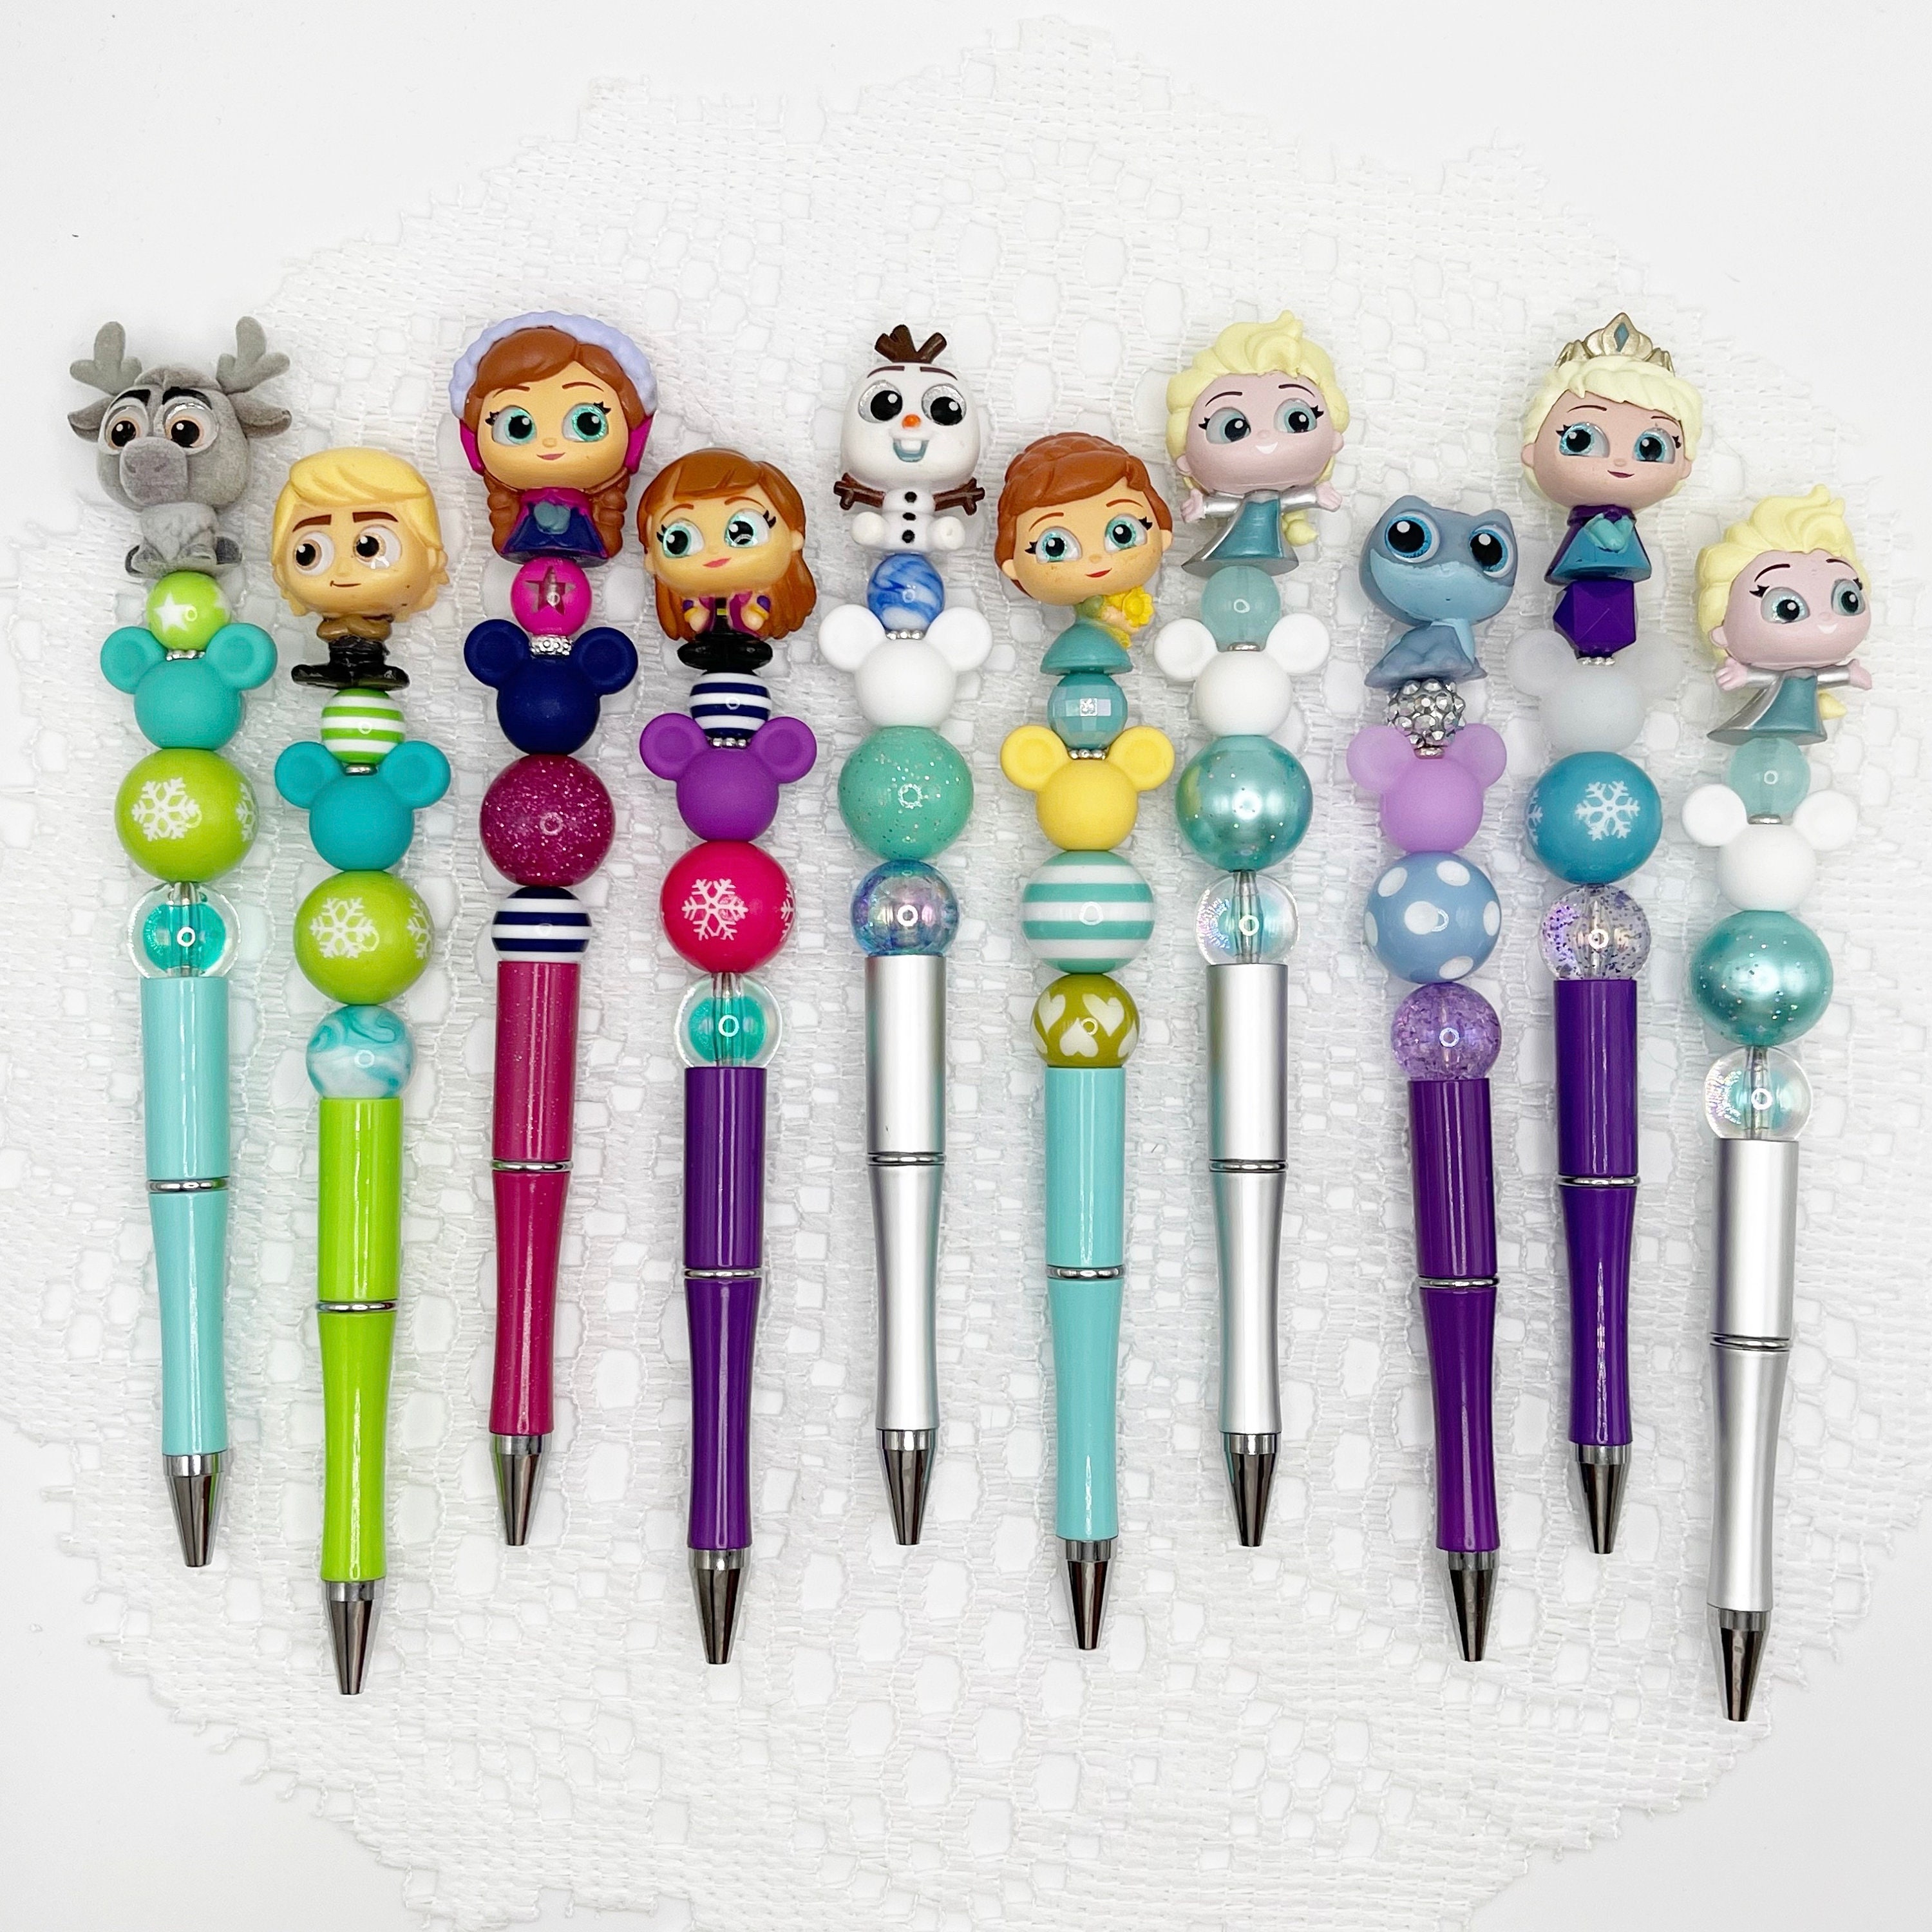 Upd Stationery Sets - Frozen 2 Personalized Six-color Pen on Card